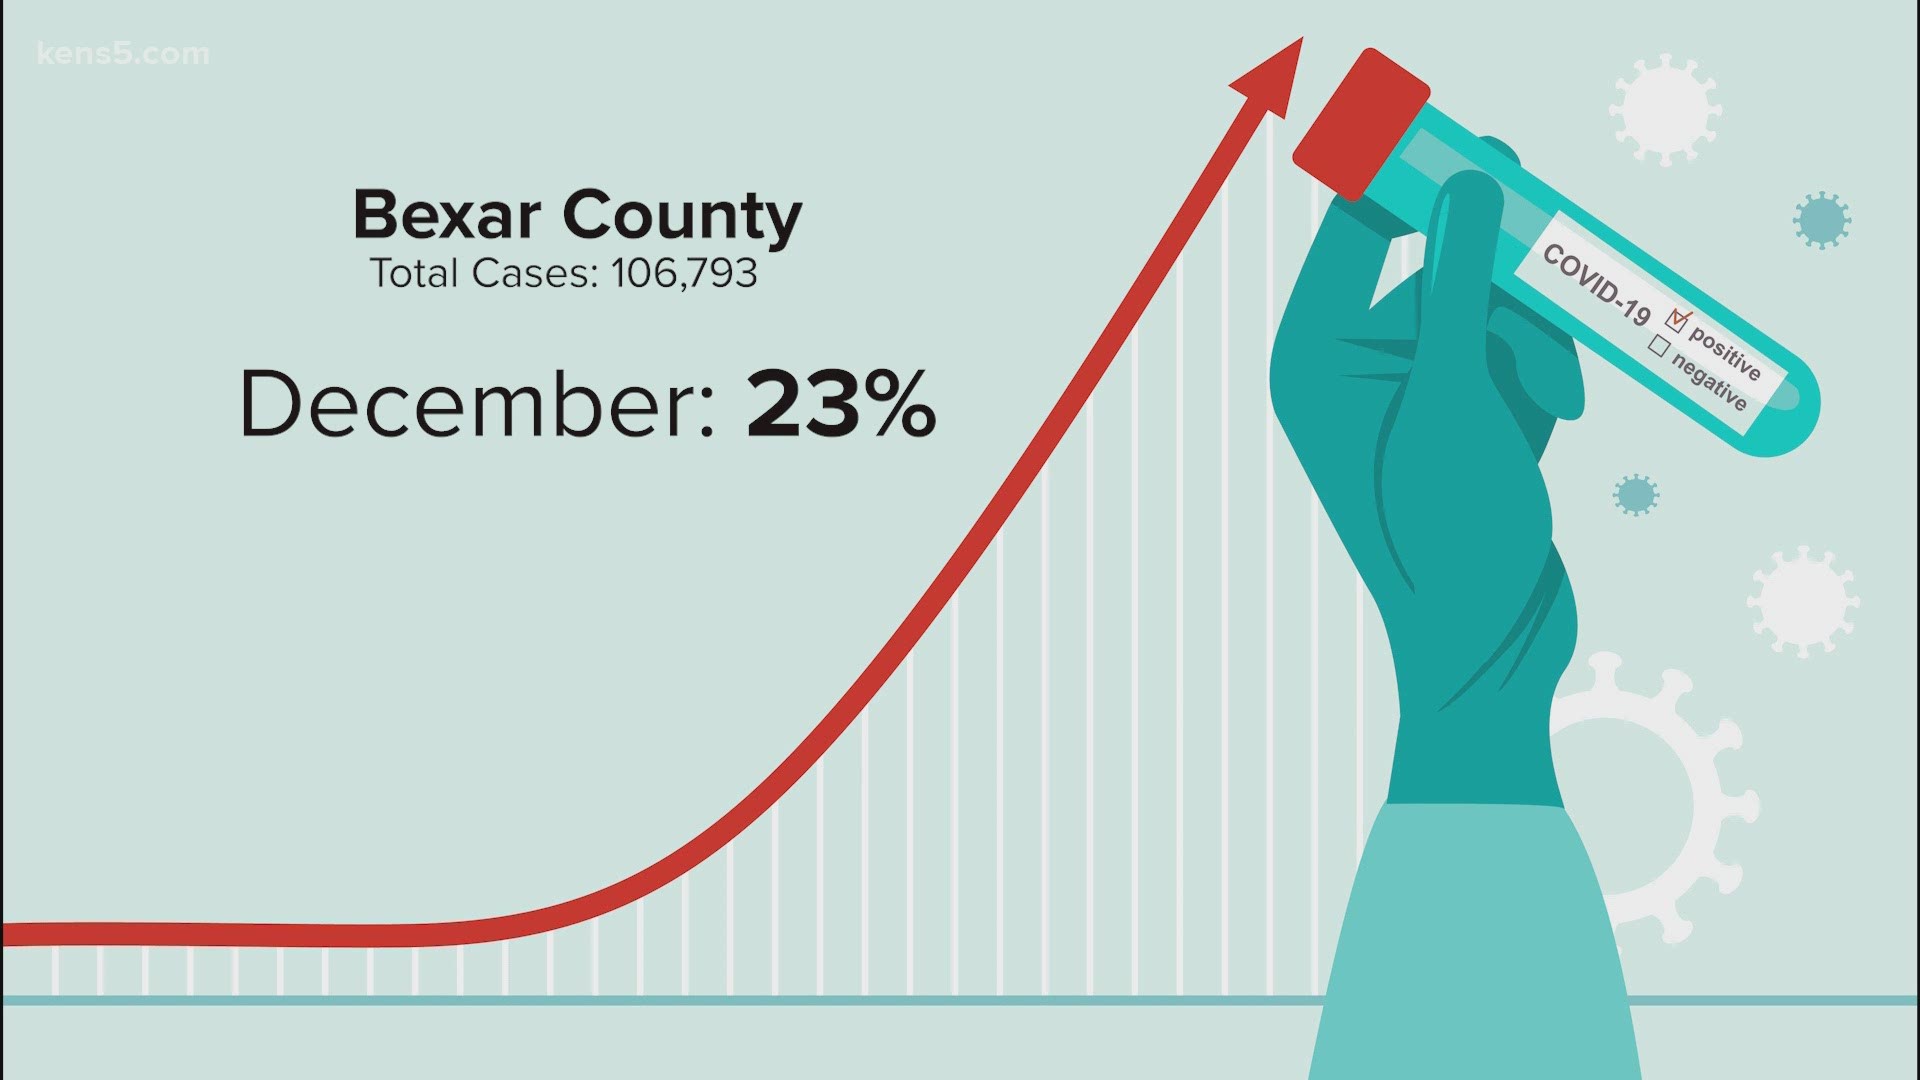 Almost 25% of all cases in Bexar and Comal counties have been reported in December. How the data could point to more restrictions in the new year.